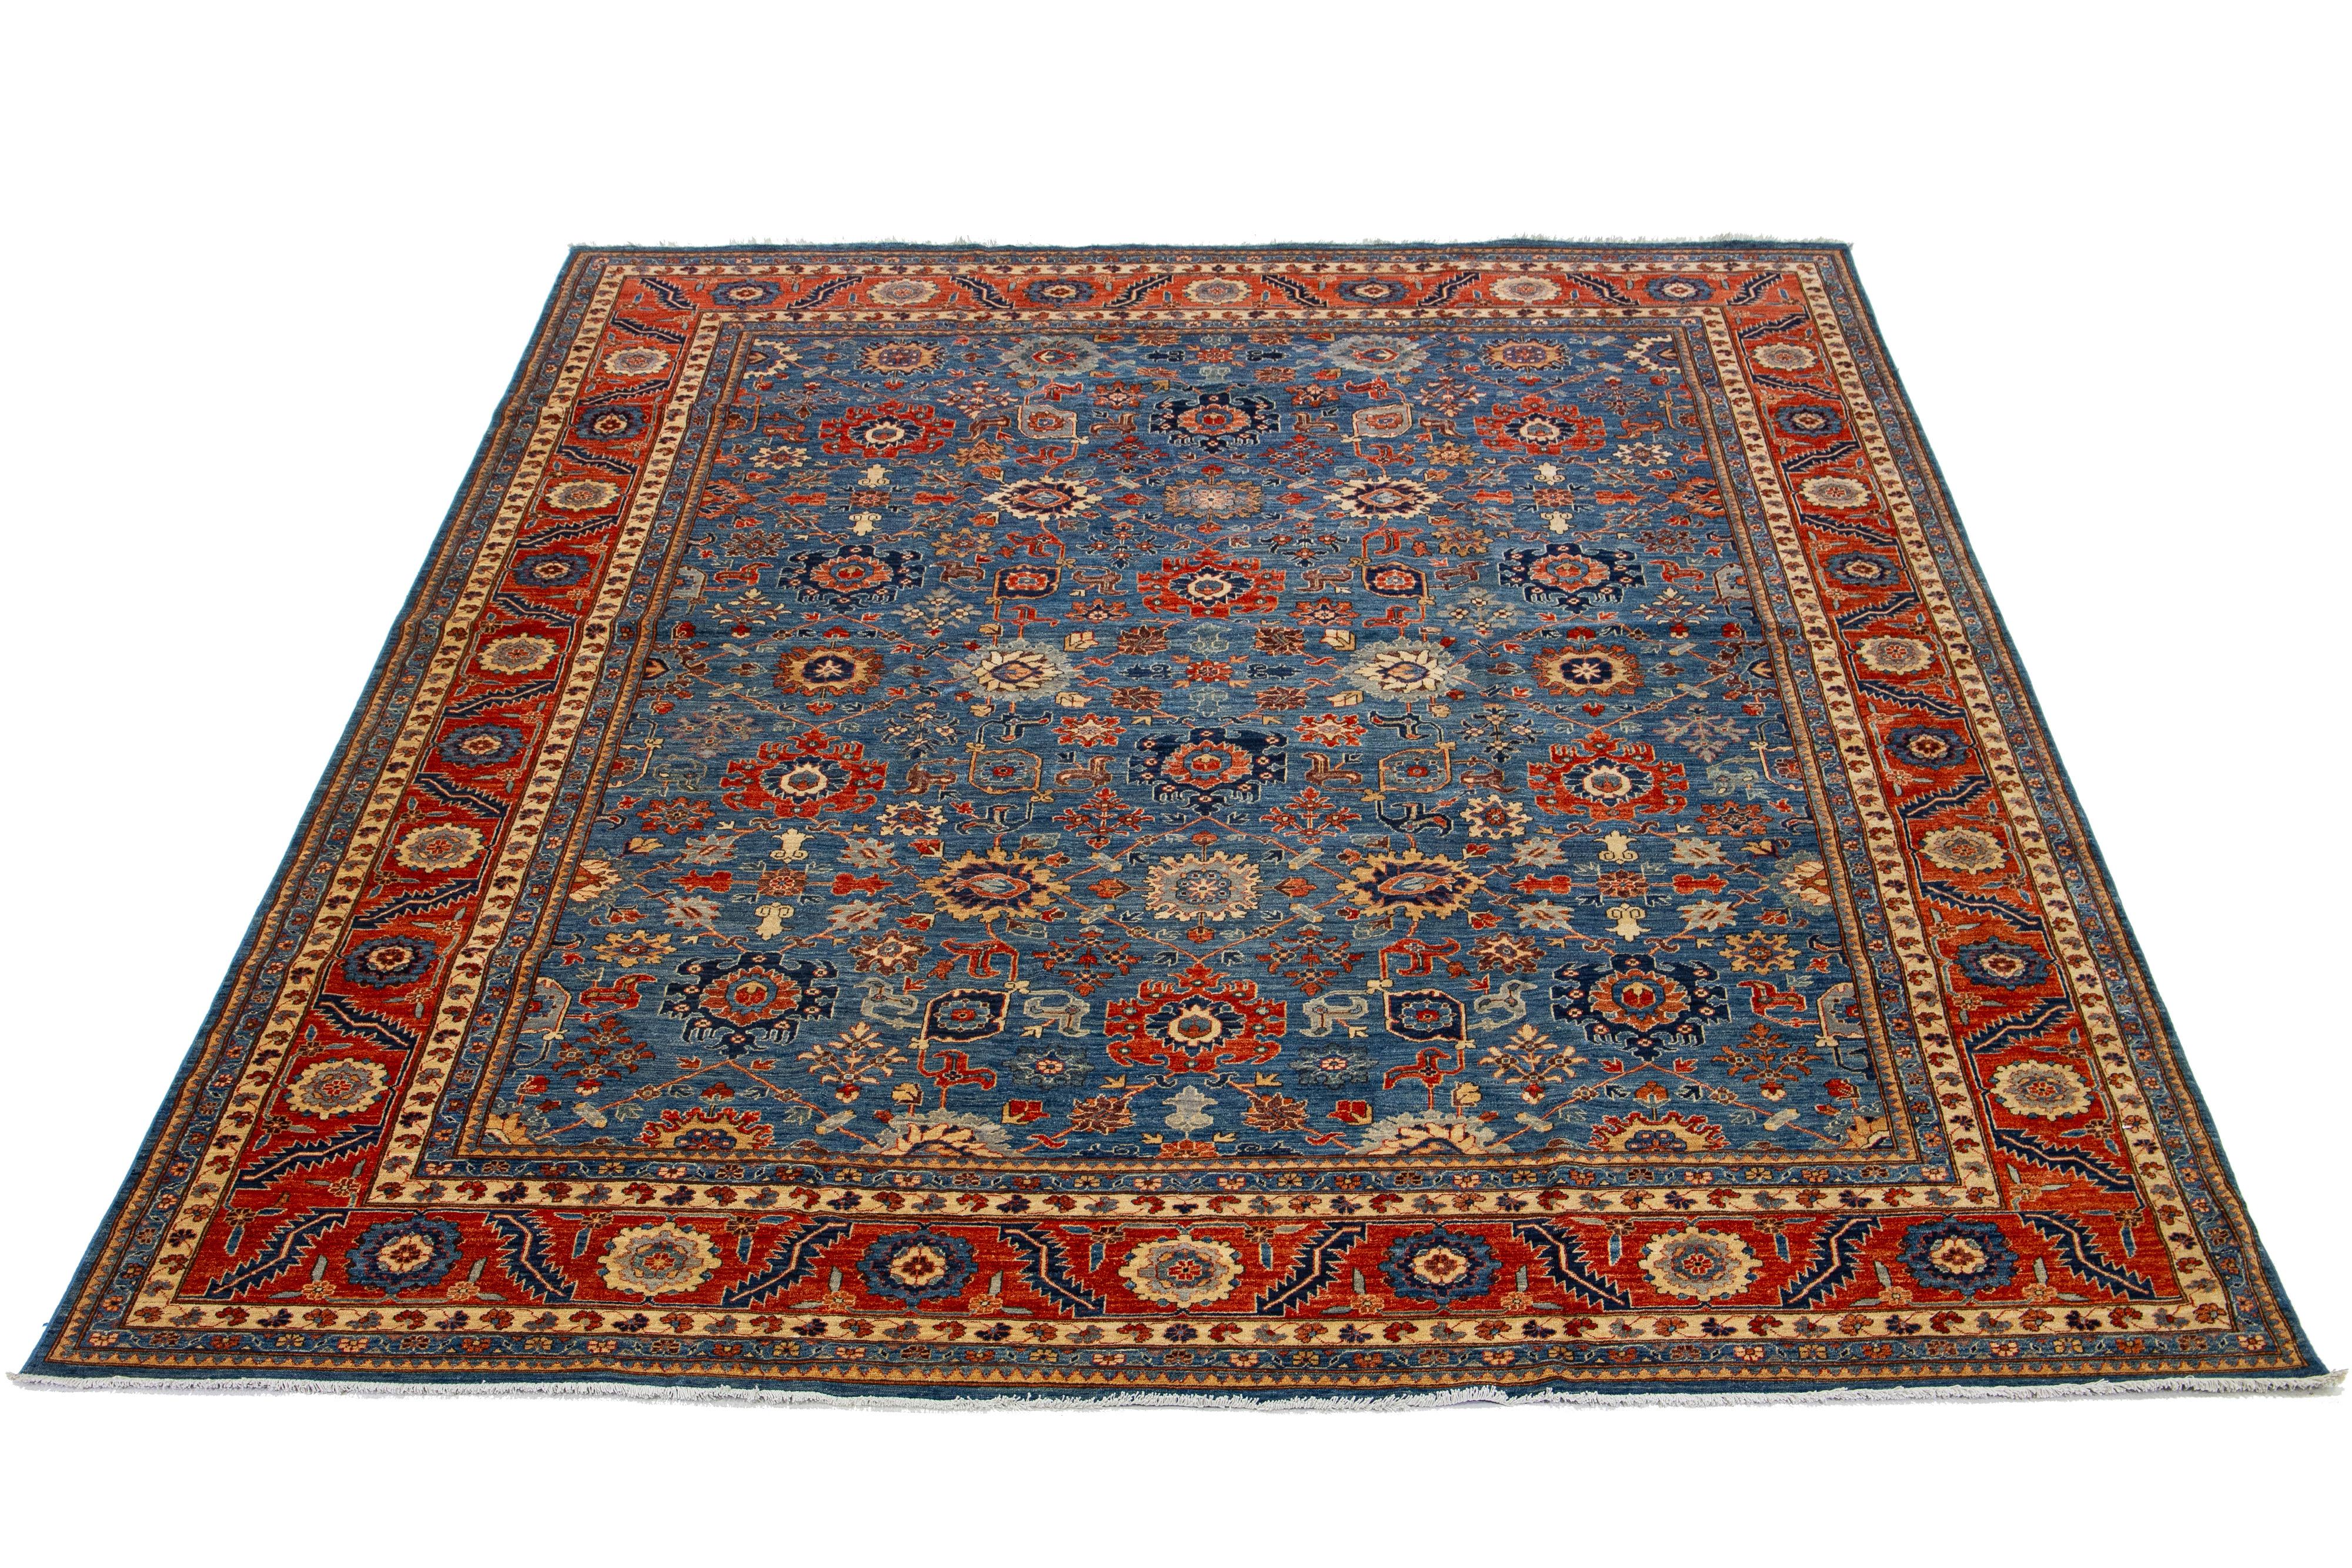 This Serapi-style hand-knotted wool rug features a navy blue color field. The piece showcases a red-designed frame and a breathtaking all-over floral pattern with exquisite multicolor accents.

This rug measures 12'1